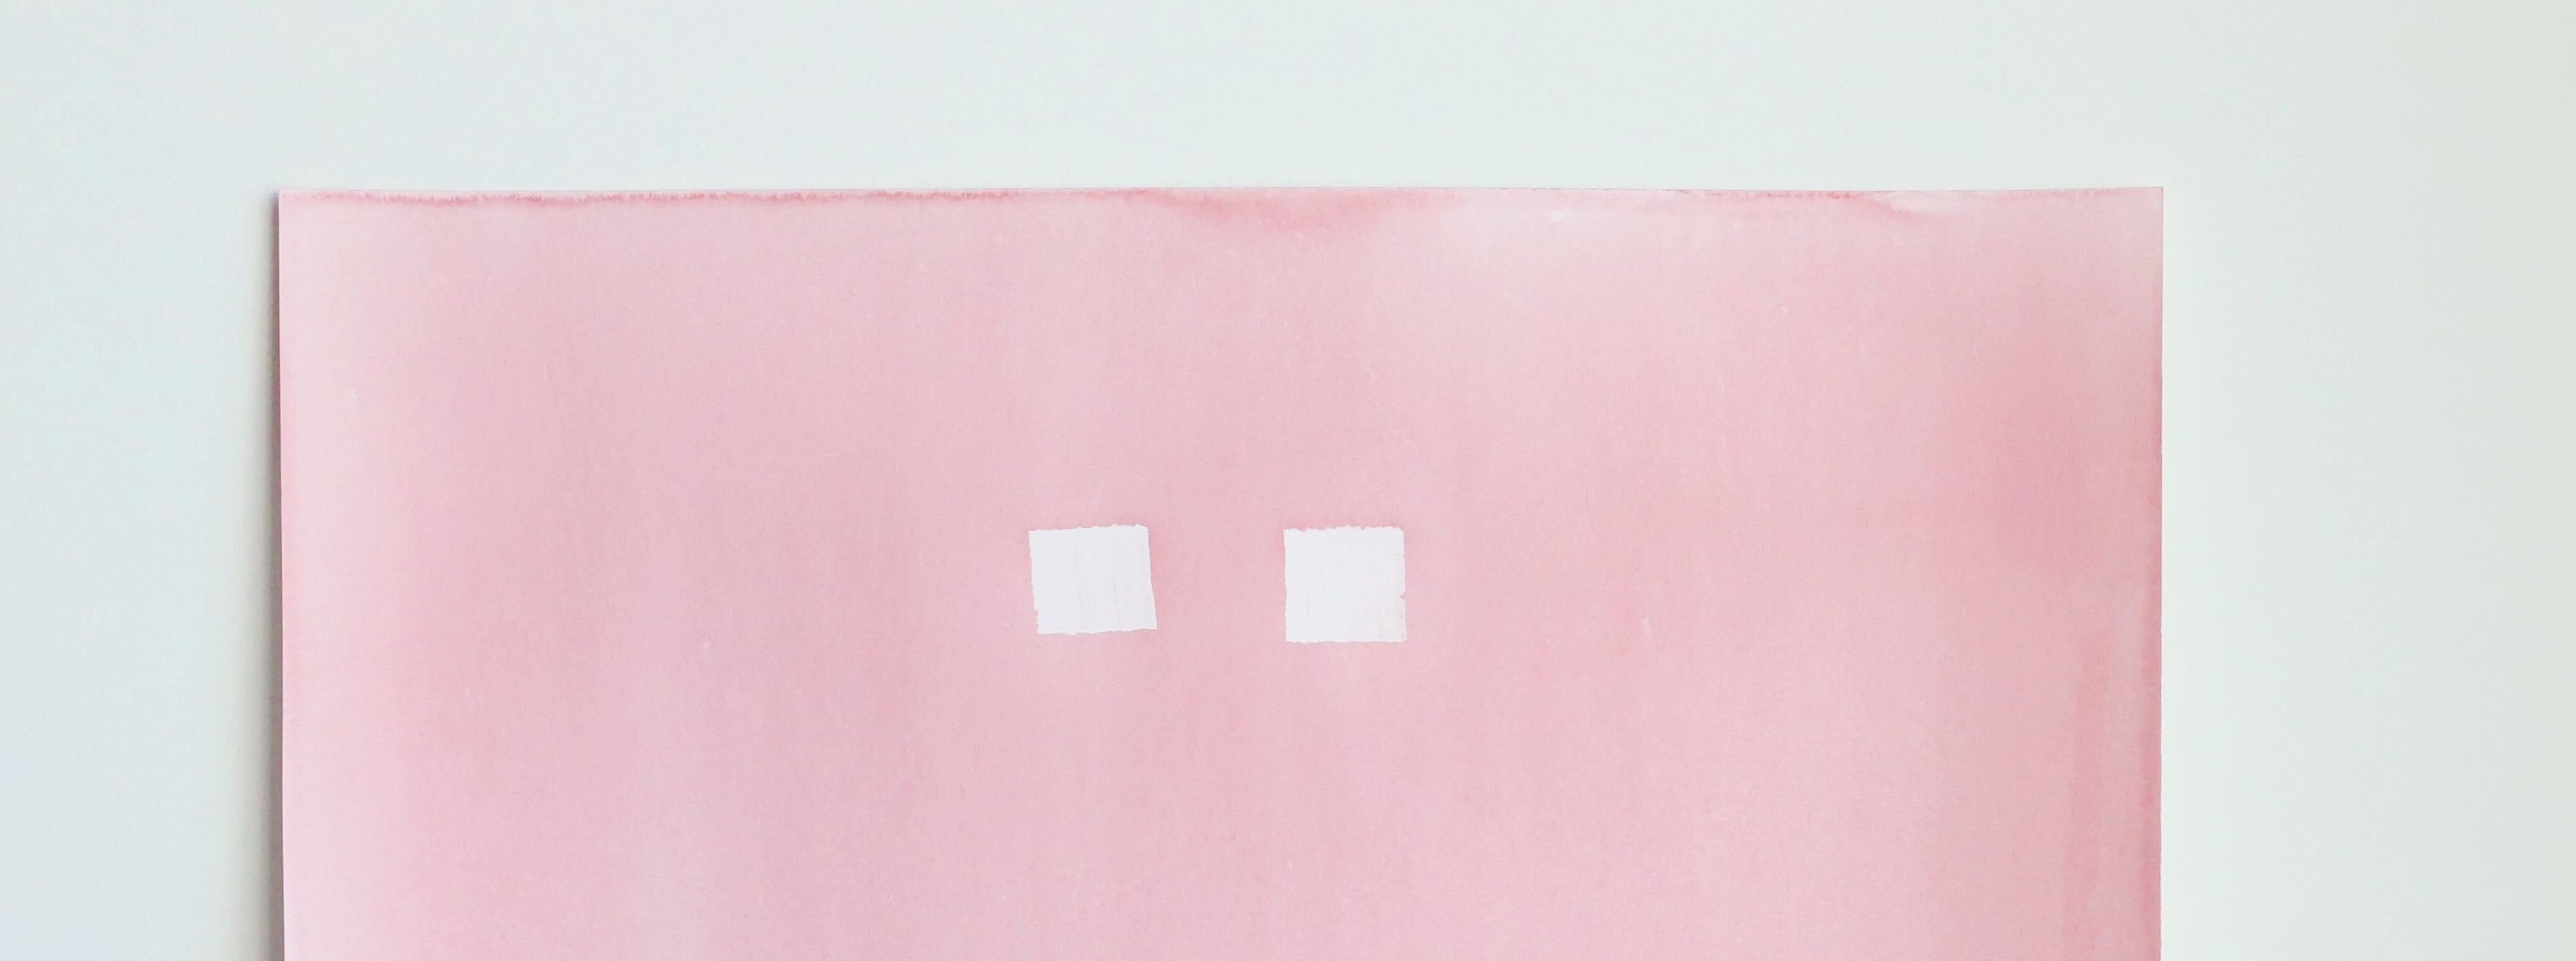 Contemporary watercolor on paper drawing GJ Kimsunken 'Untitled' pink minimal 2